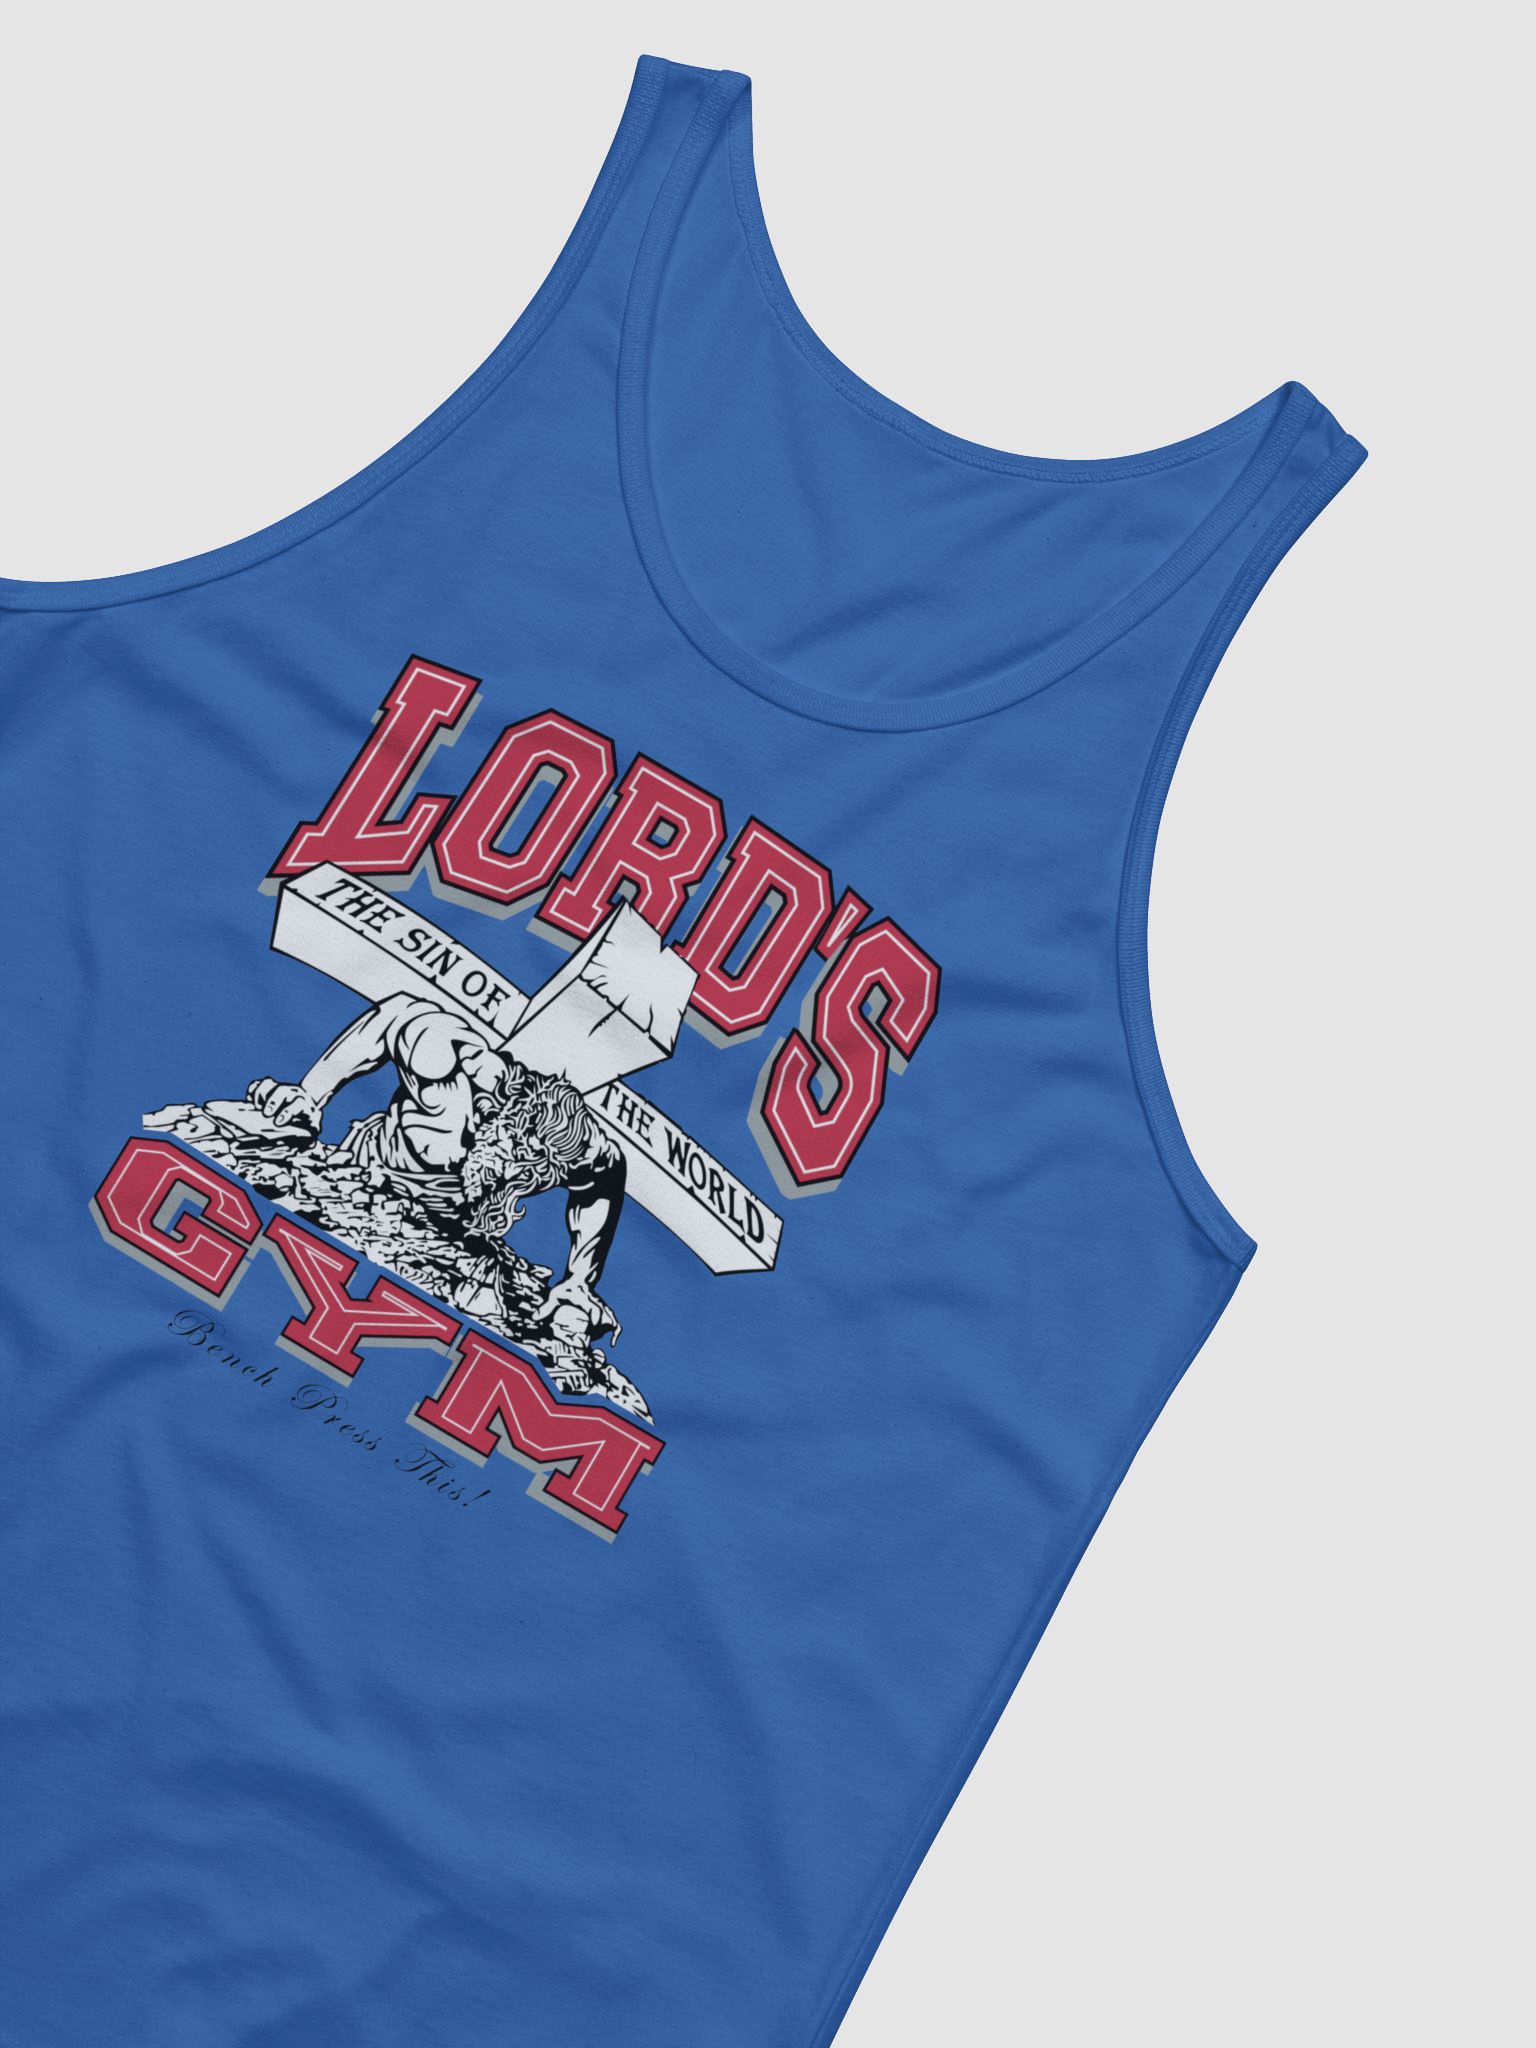 LORDS GYM MUSCLE TANK TOP SHIRT – OldSkool Shirts